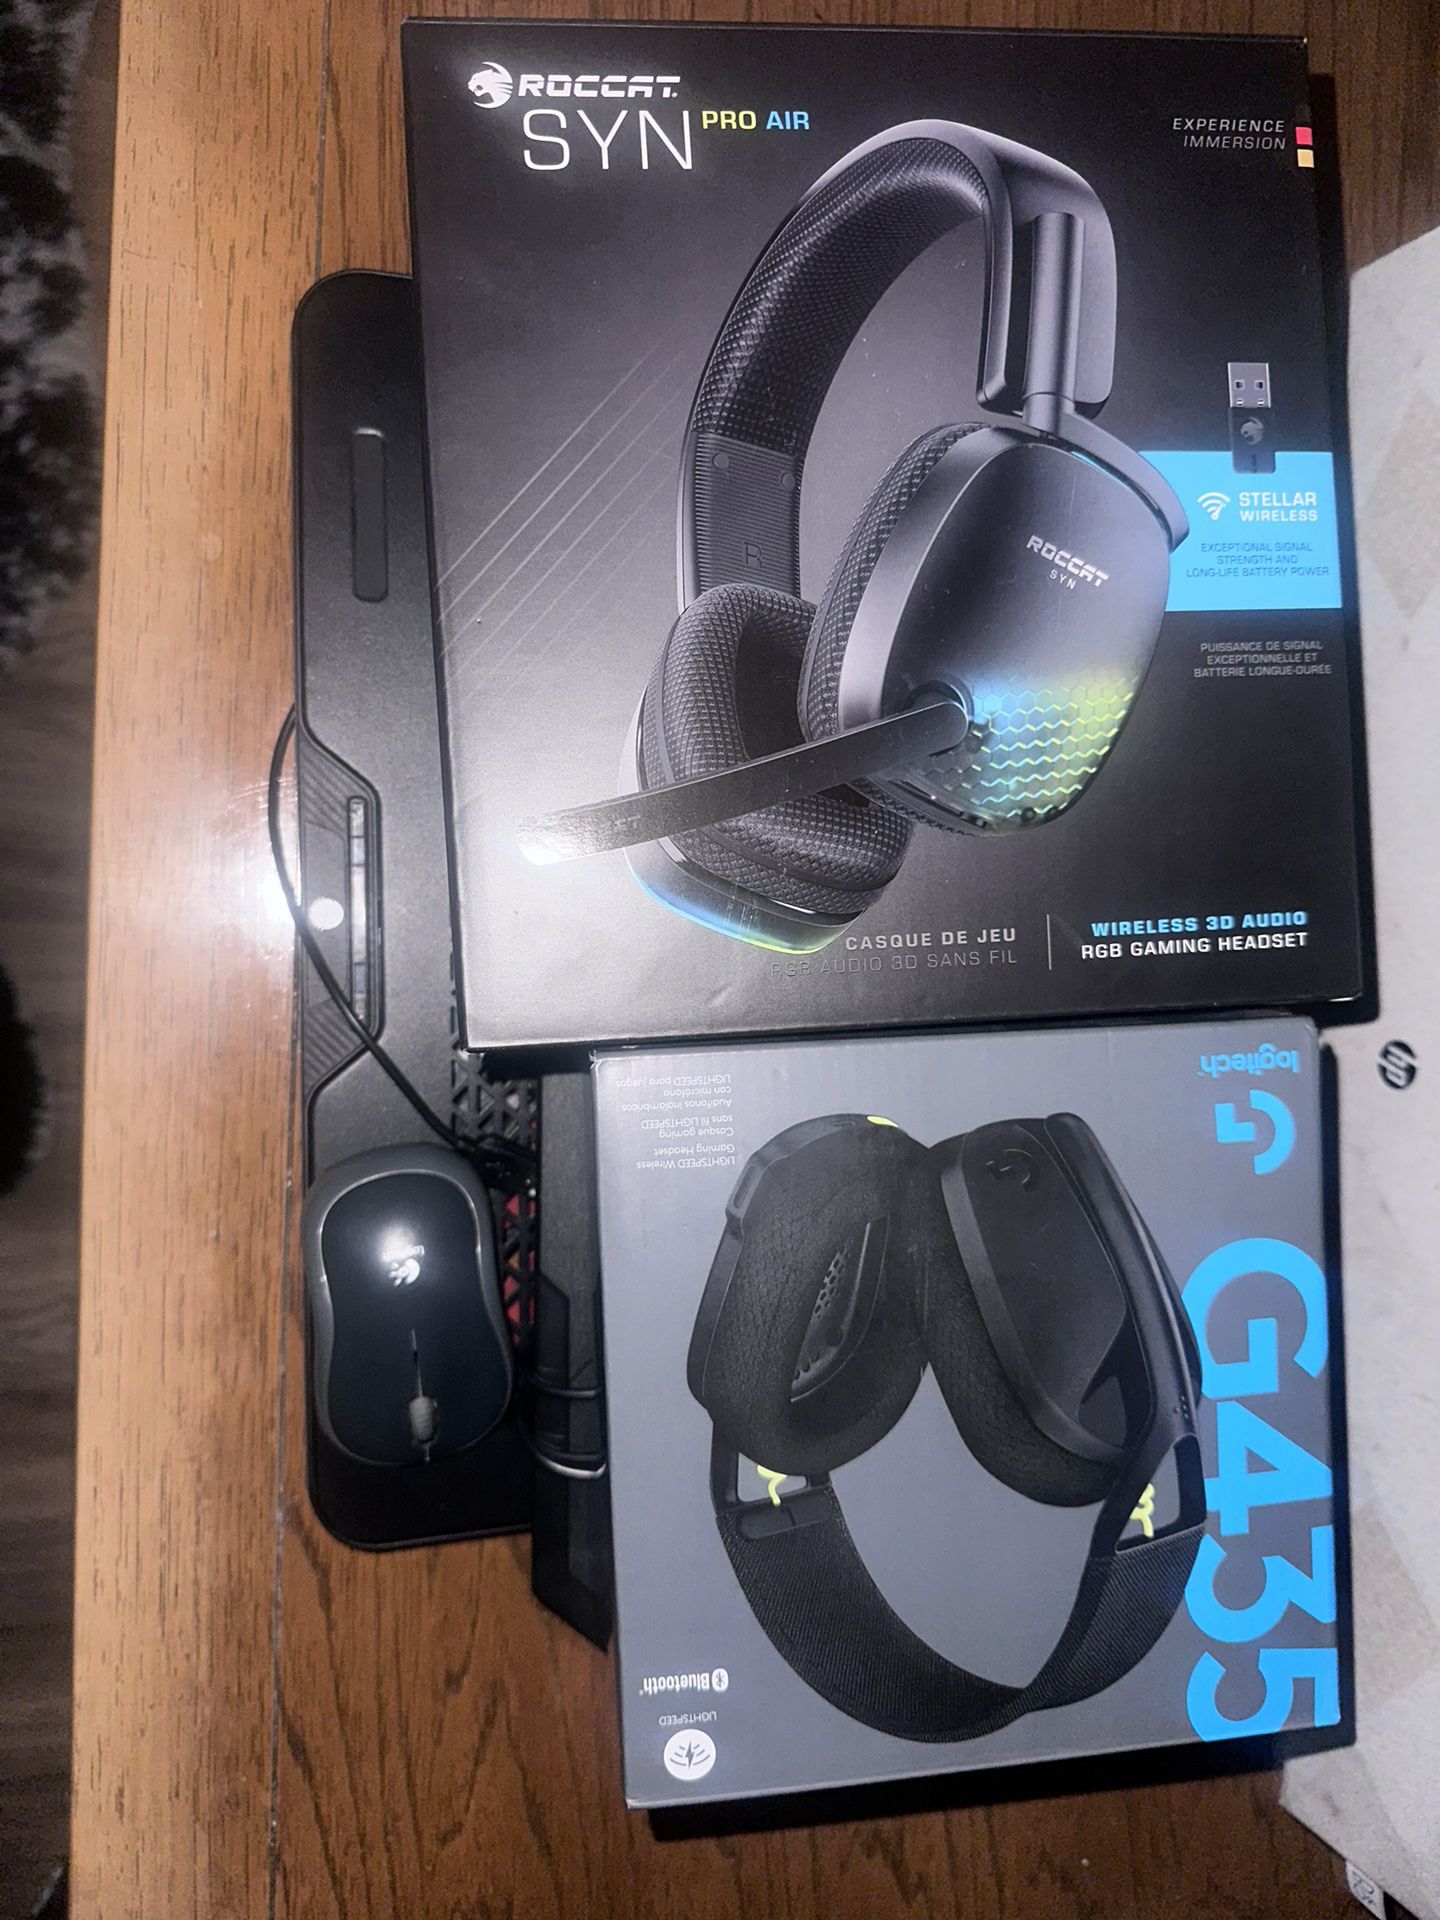 Gaming Headsets Etc 